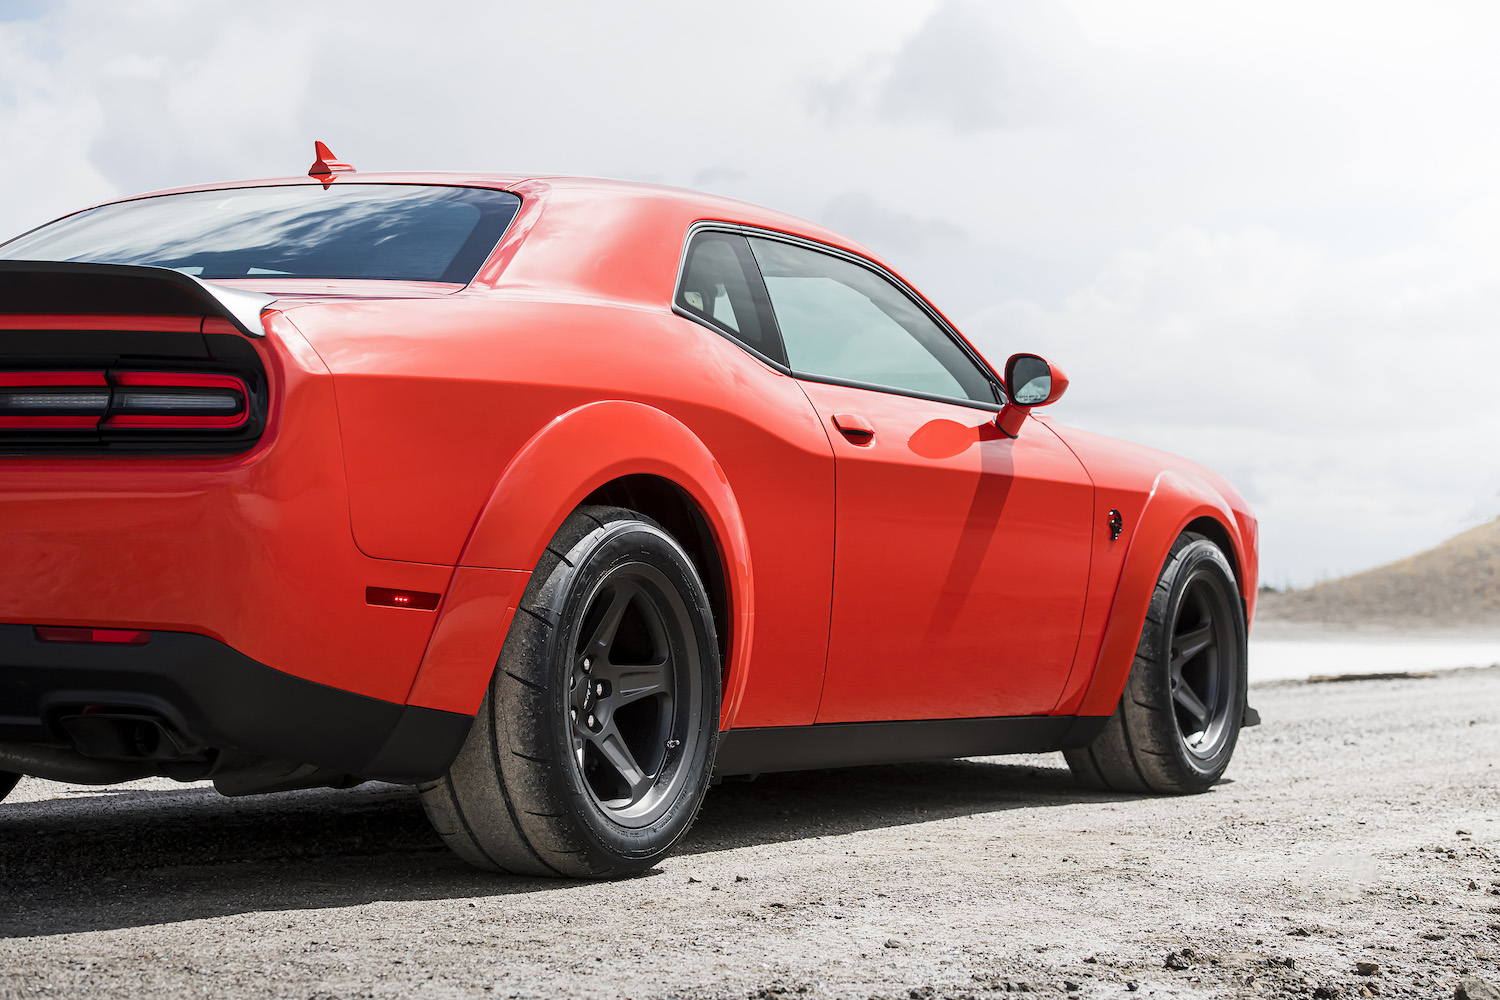 2022 Challenger SRT Super Stock. This muscle car is cancelled after 2023 | Dodge